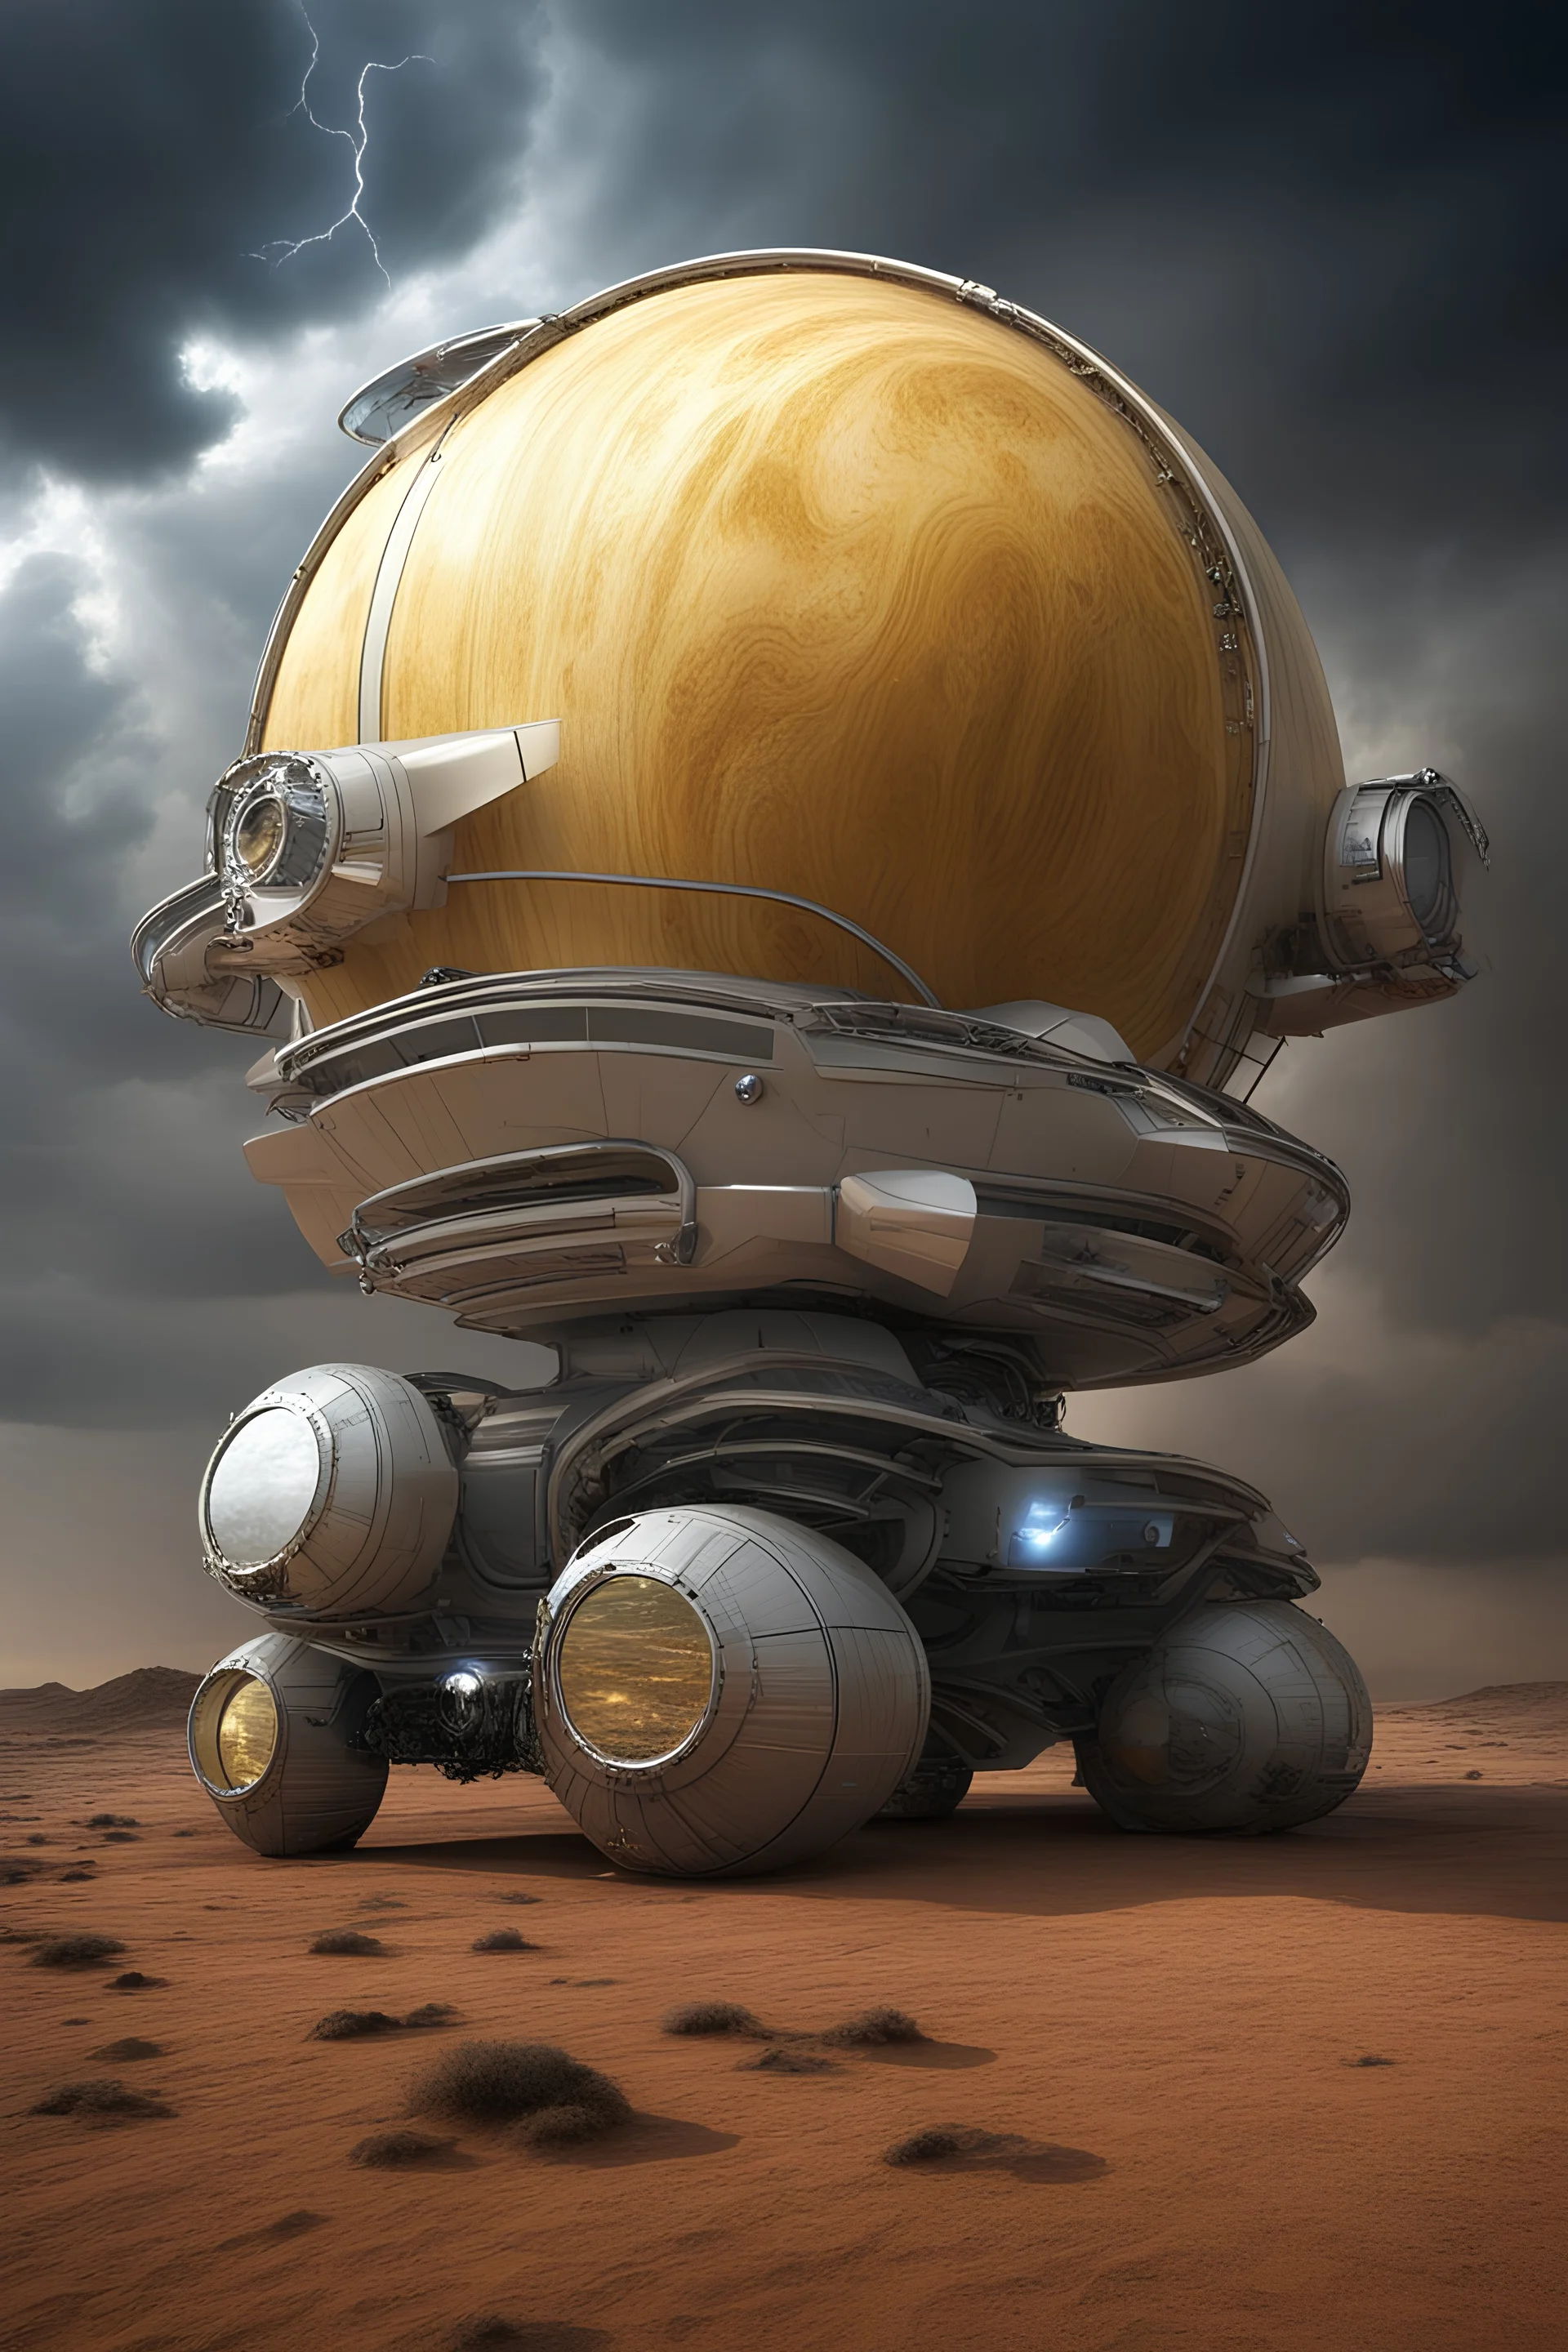 An advanced vehicle made for planet venus that has bright lights that can withstands strong storms and winds, sulfric acid rains